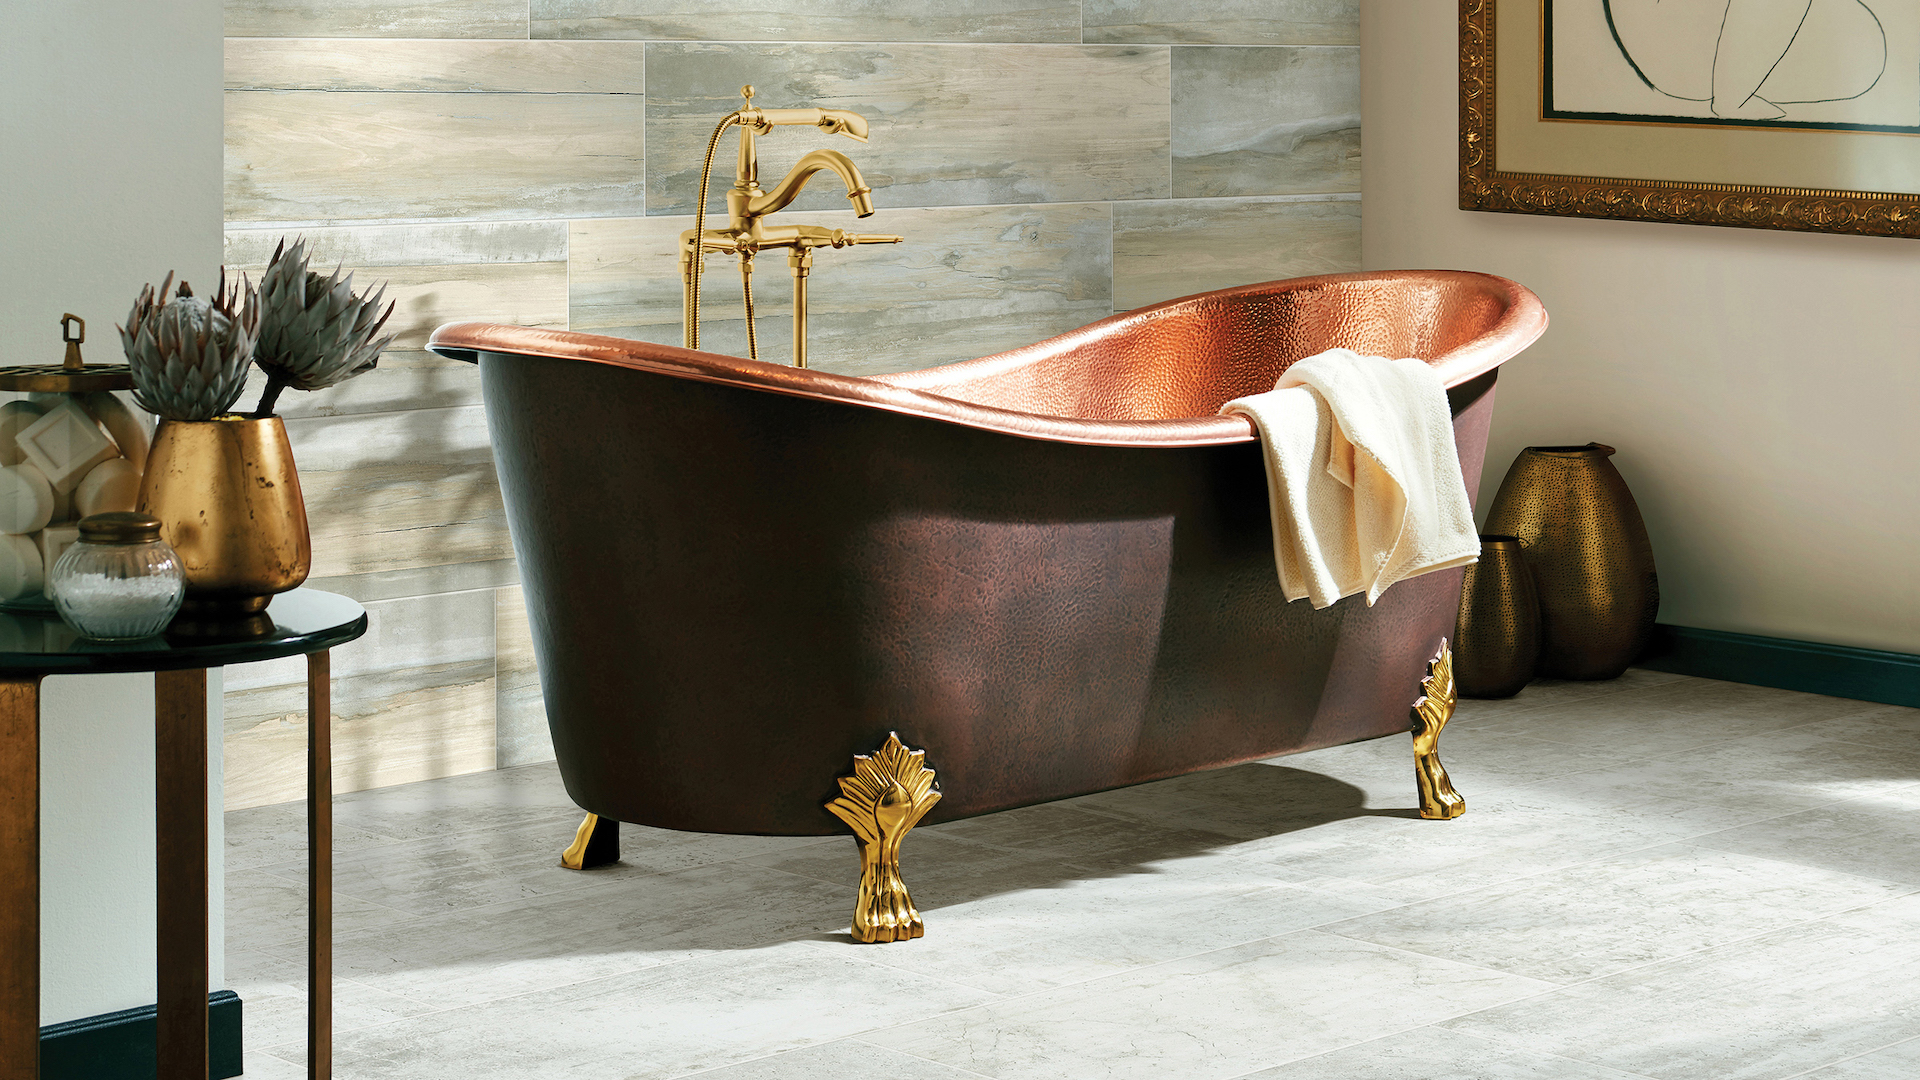 grey tile flooring and wood look tile walls in a stylish bathroom with a stand alone copper tub